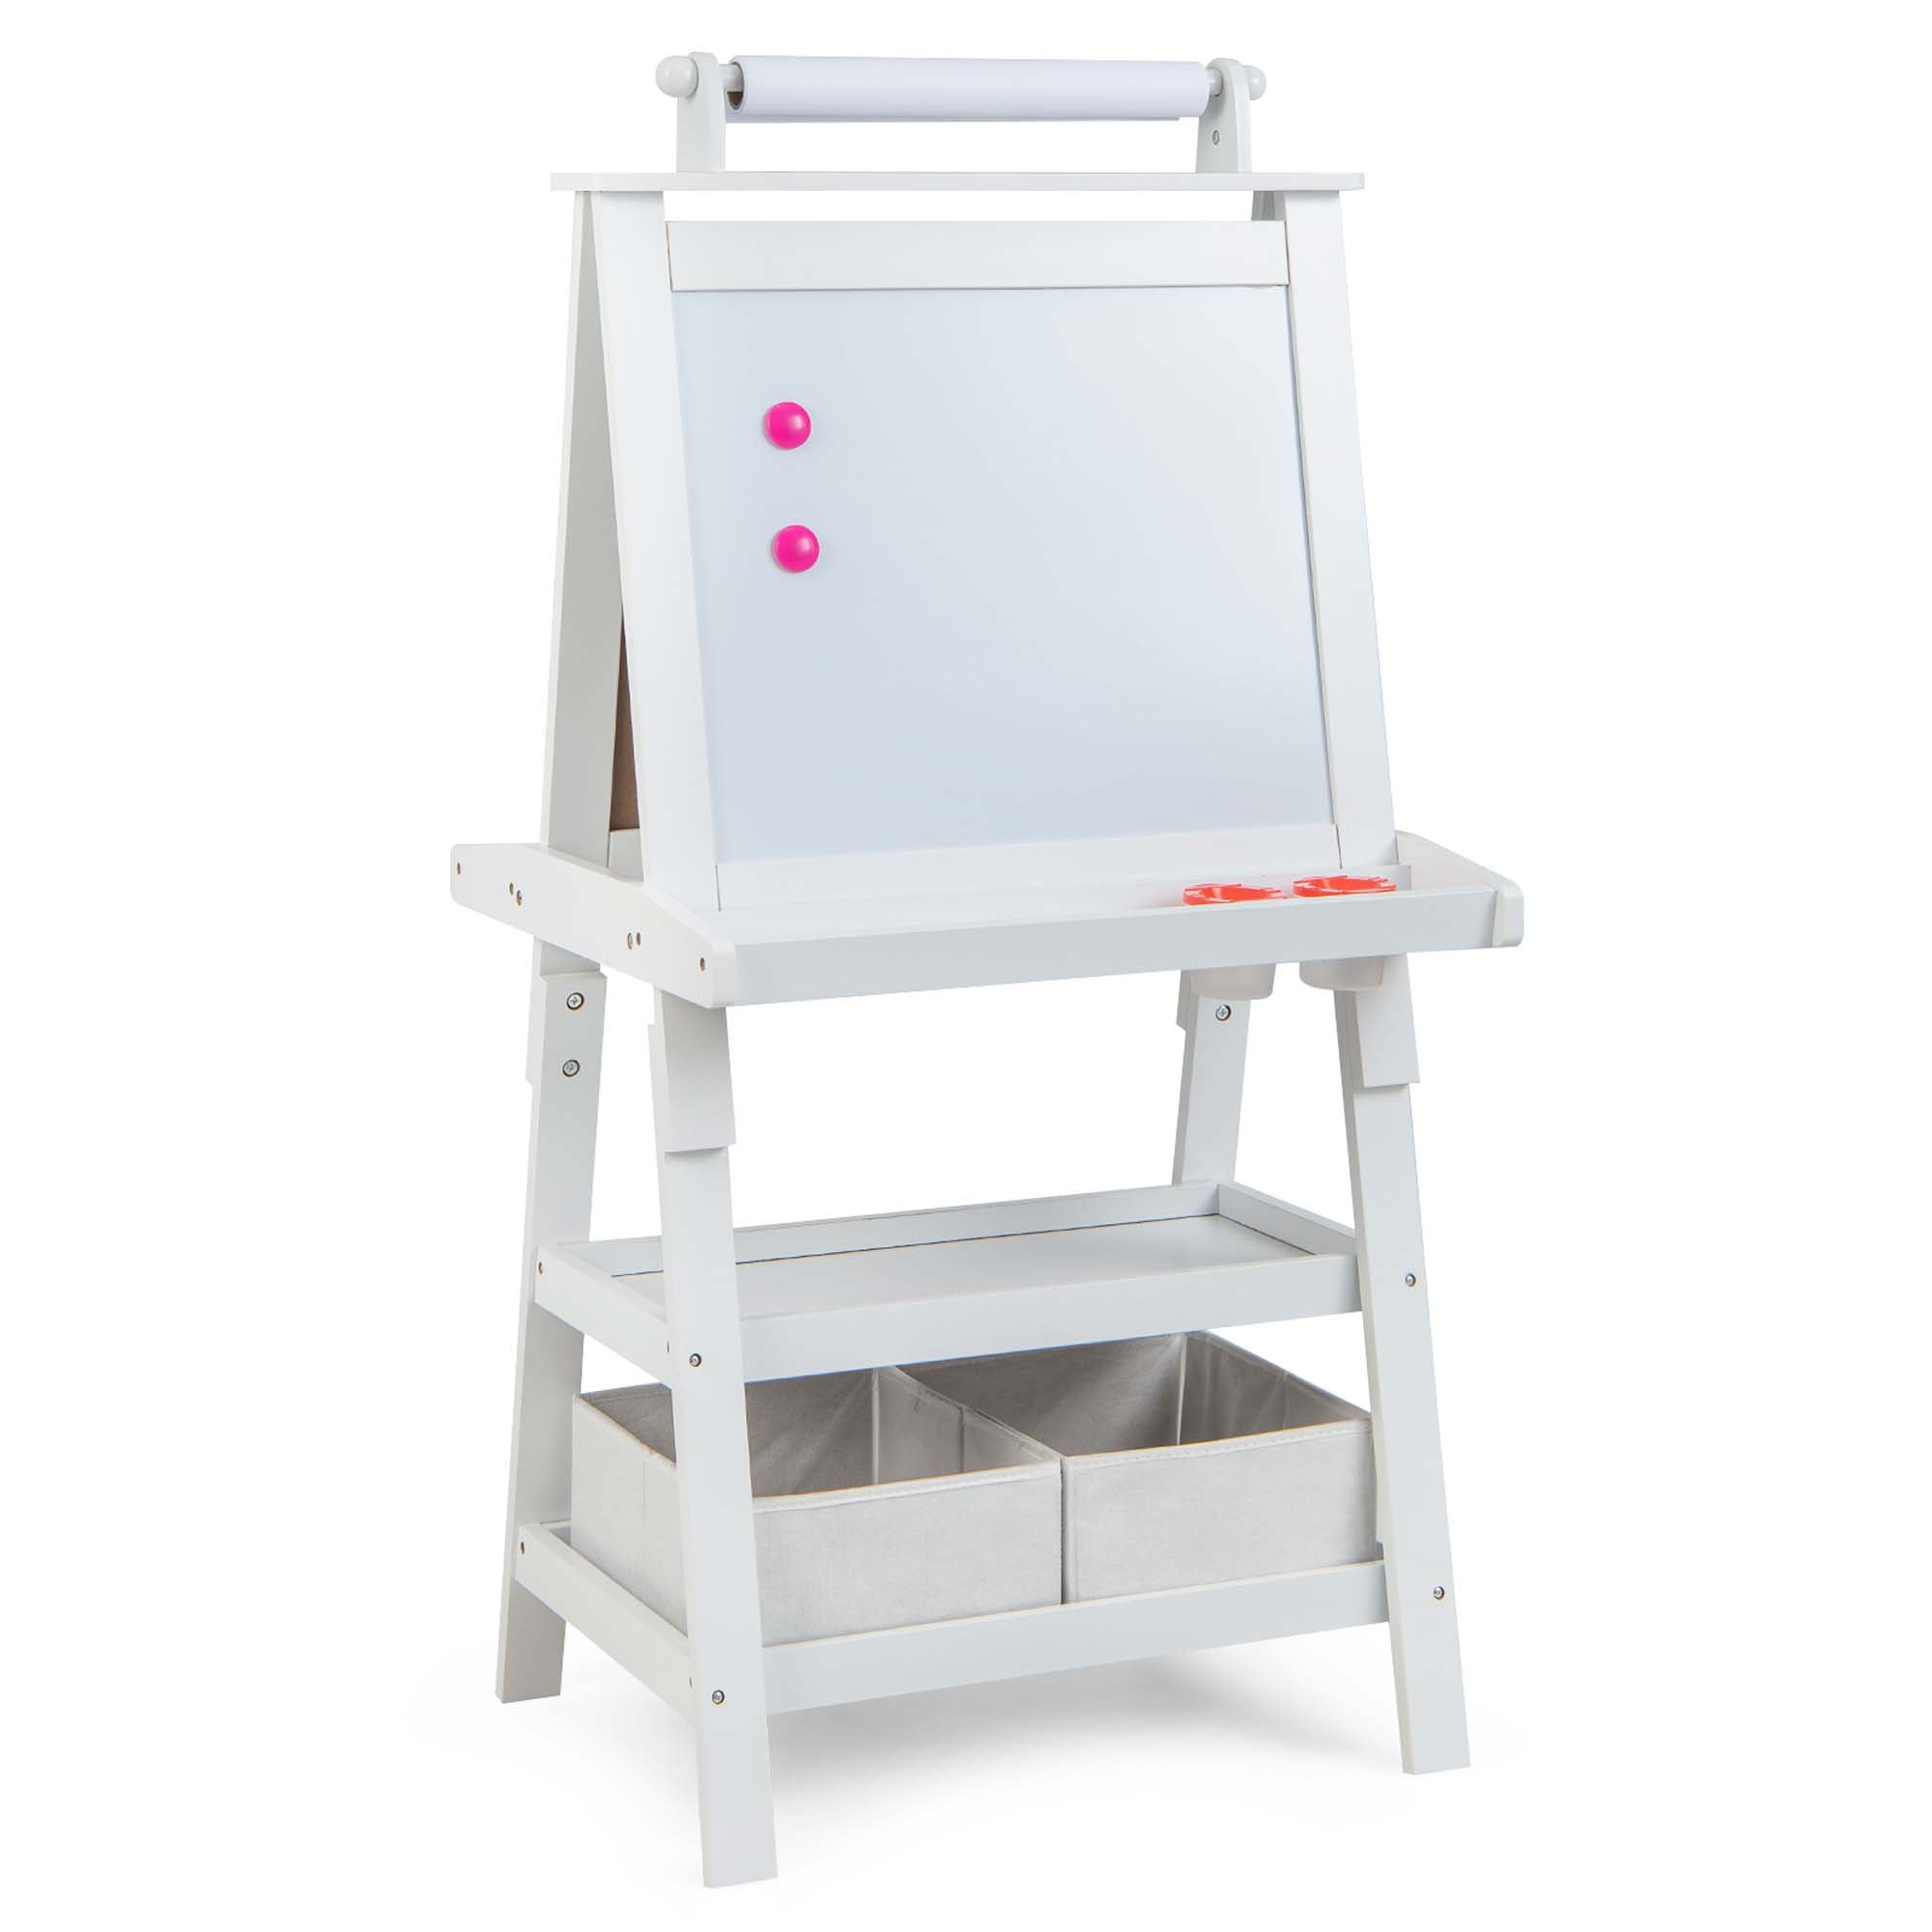 Easel for Kids, Weudear Kids Easel Double Sided Wooden Easel Standing, 4 in  1 White Board & Magnetic Drawing Board & Tabletop Easel, Art Easel for